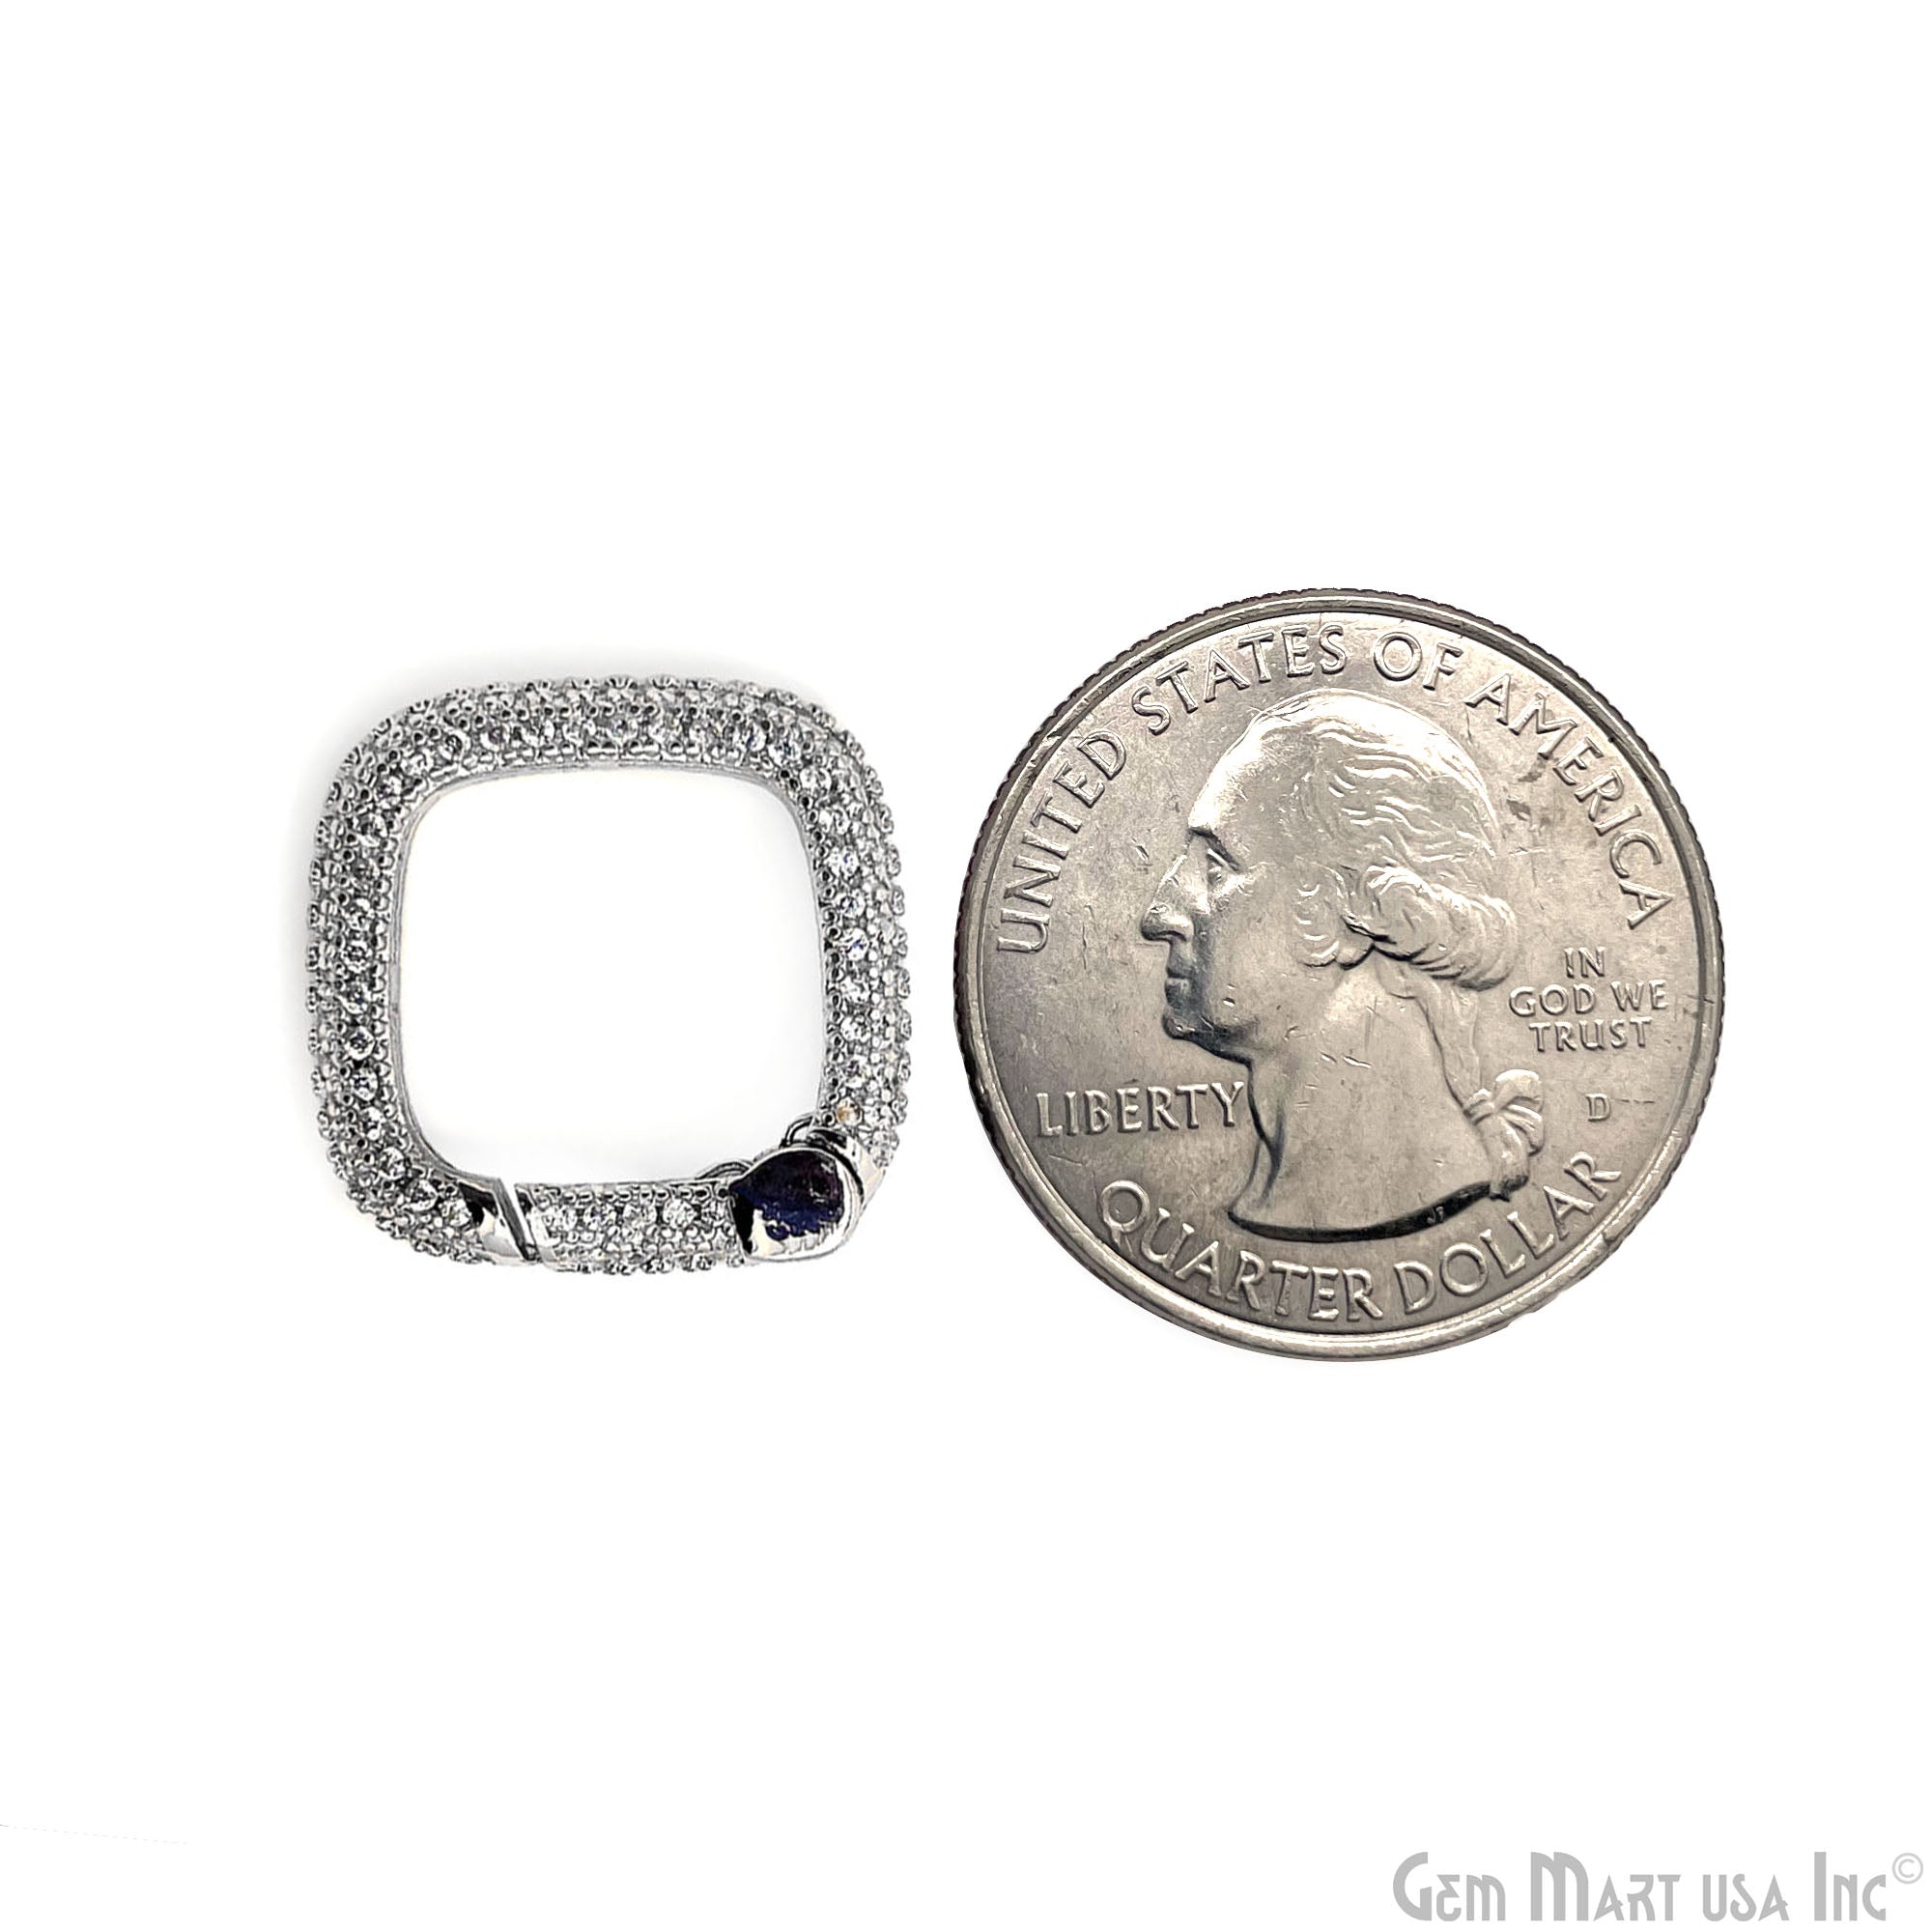 Dainty CZ Pave Square Spring Gate Ring 18mm Square Push Gate Ring-Jewelry Making Findings